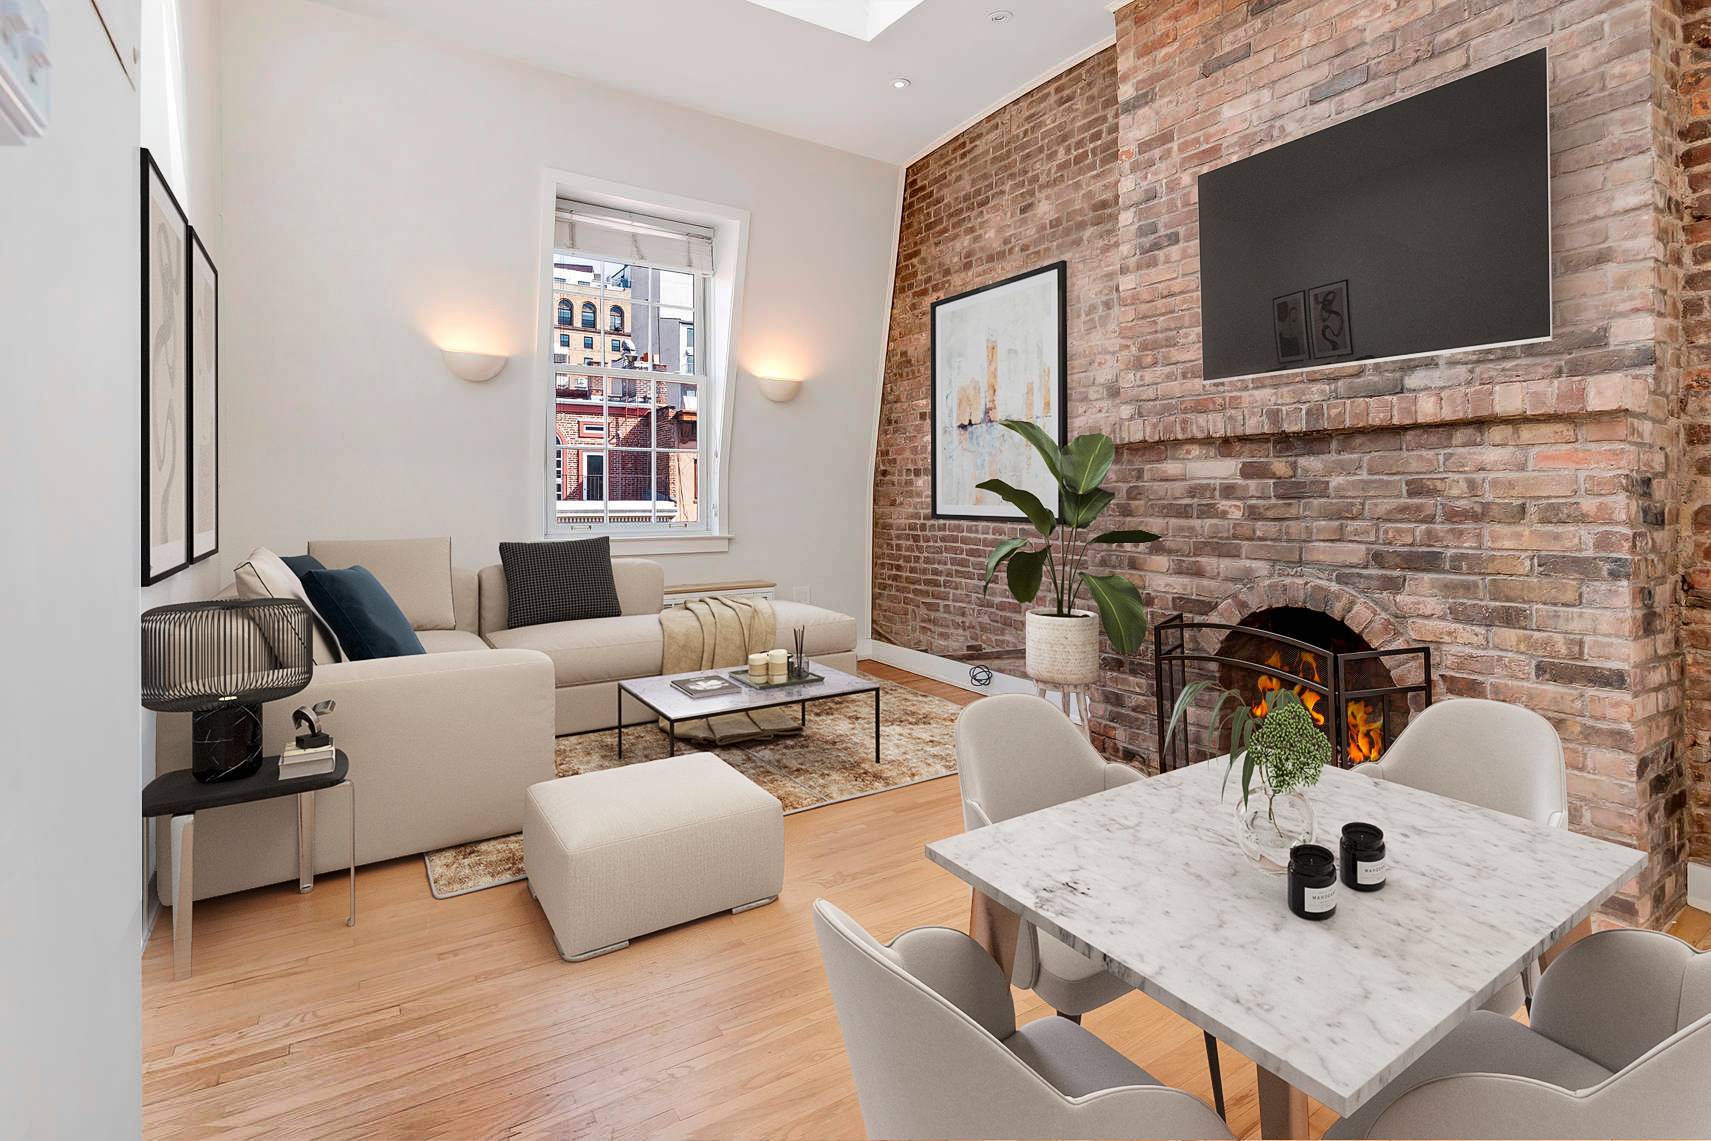 Skylights WB Fireplace Stunning Renovation This rare beauty is perched on the top floor of a Chelsea brownstone, offering soaring 16 foot ceilings and magnificent skylights in the living room ...